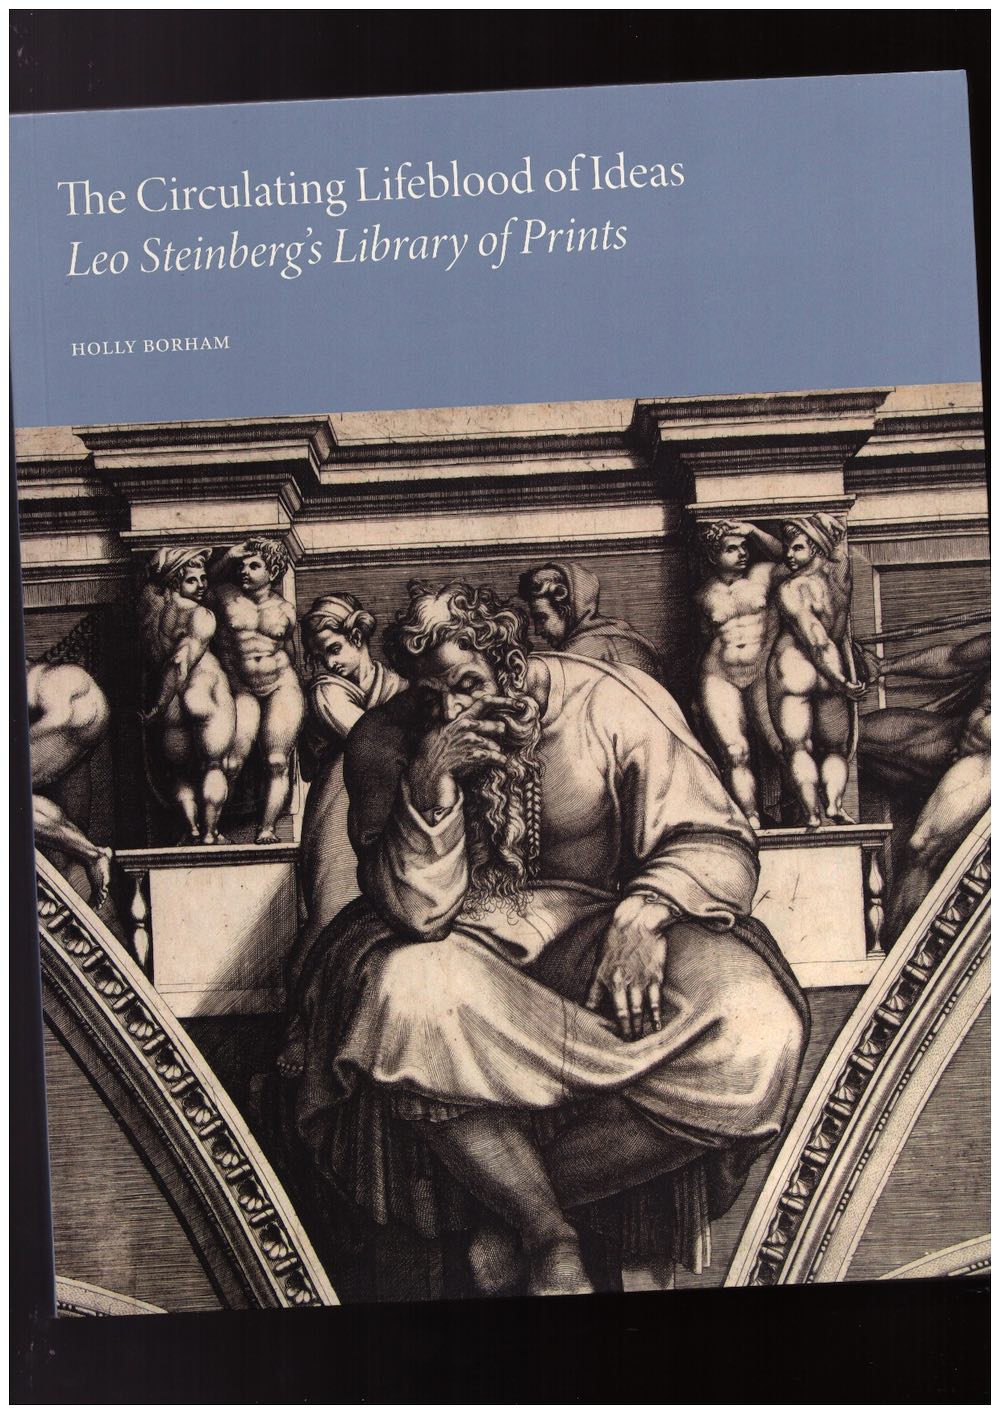 BORHAM, Holly - The Circulating Lifeblood of Ideas. Leo Steinberg’s Library and Prints